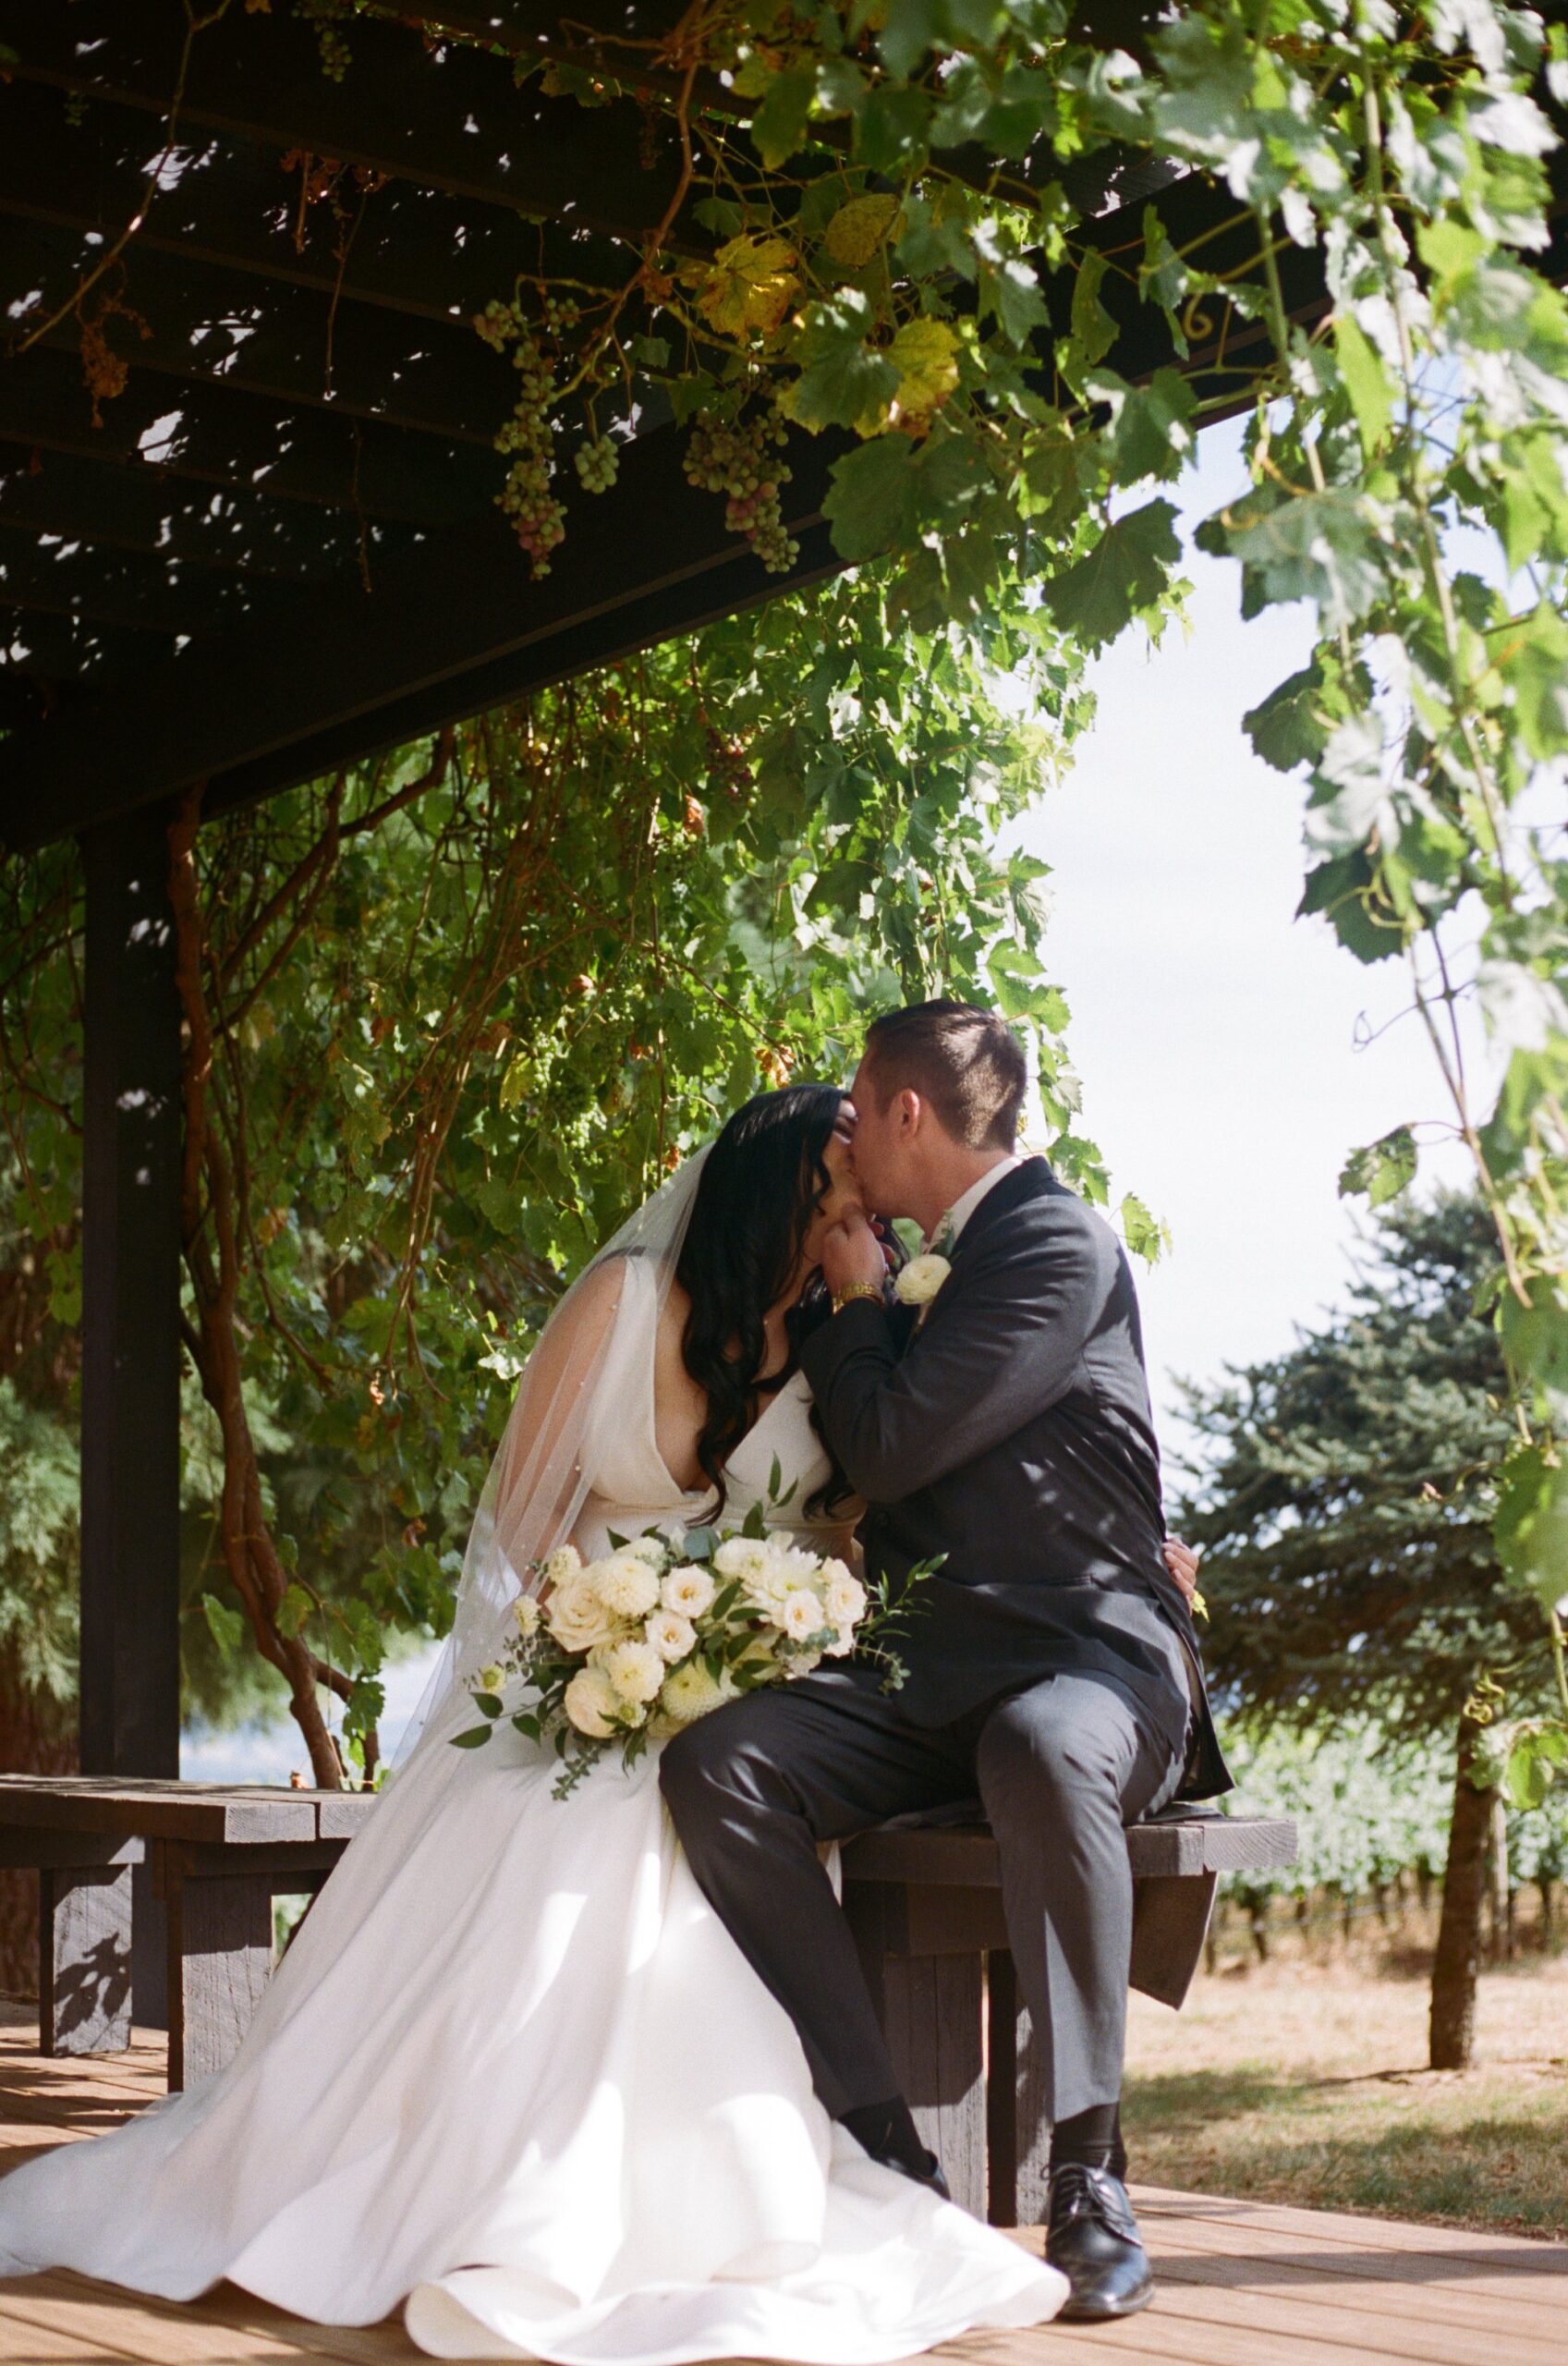 bride and groom kissing under grape vines while bride is holding bouquet of flowers